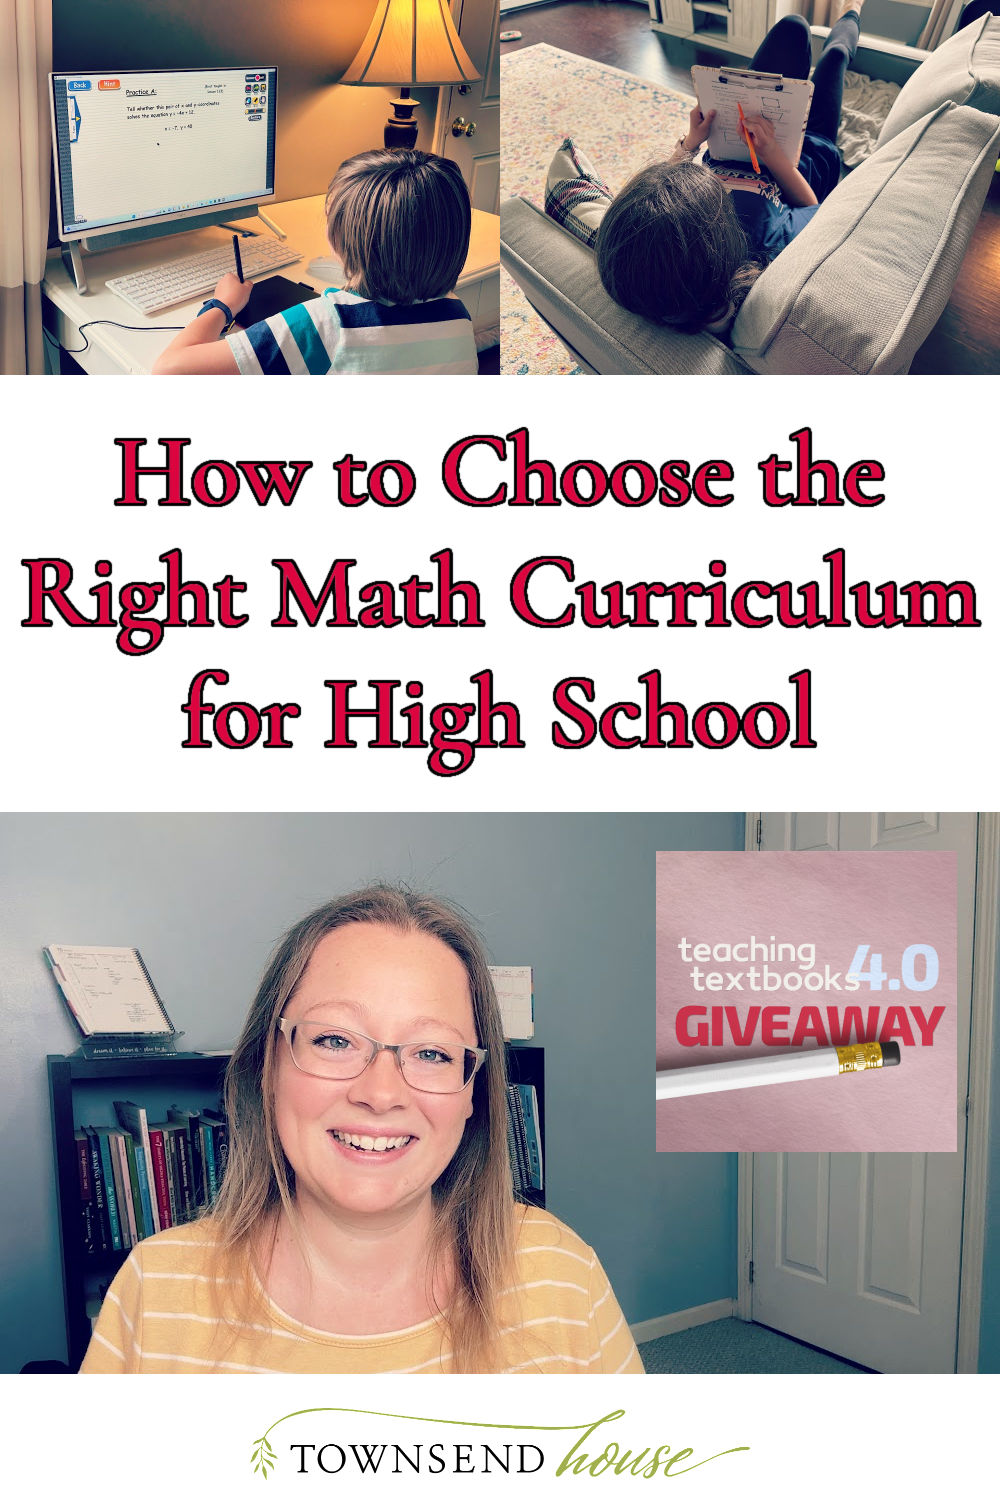 How to Choose the Right Math Curriculum for High School